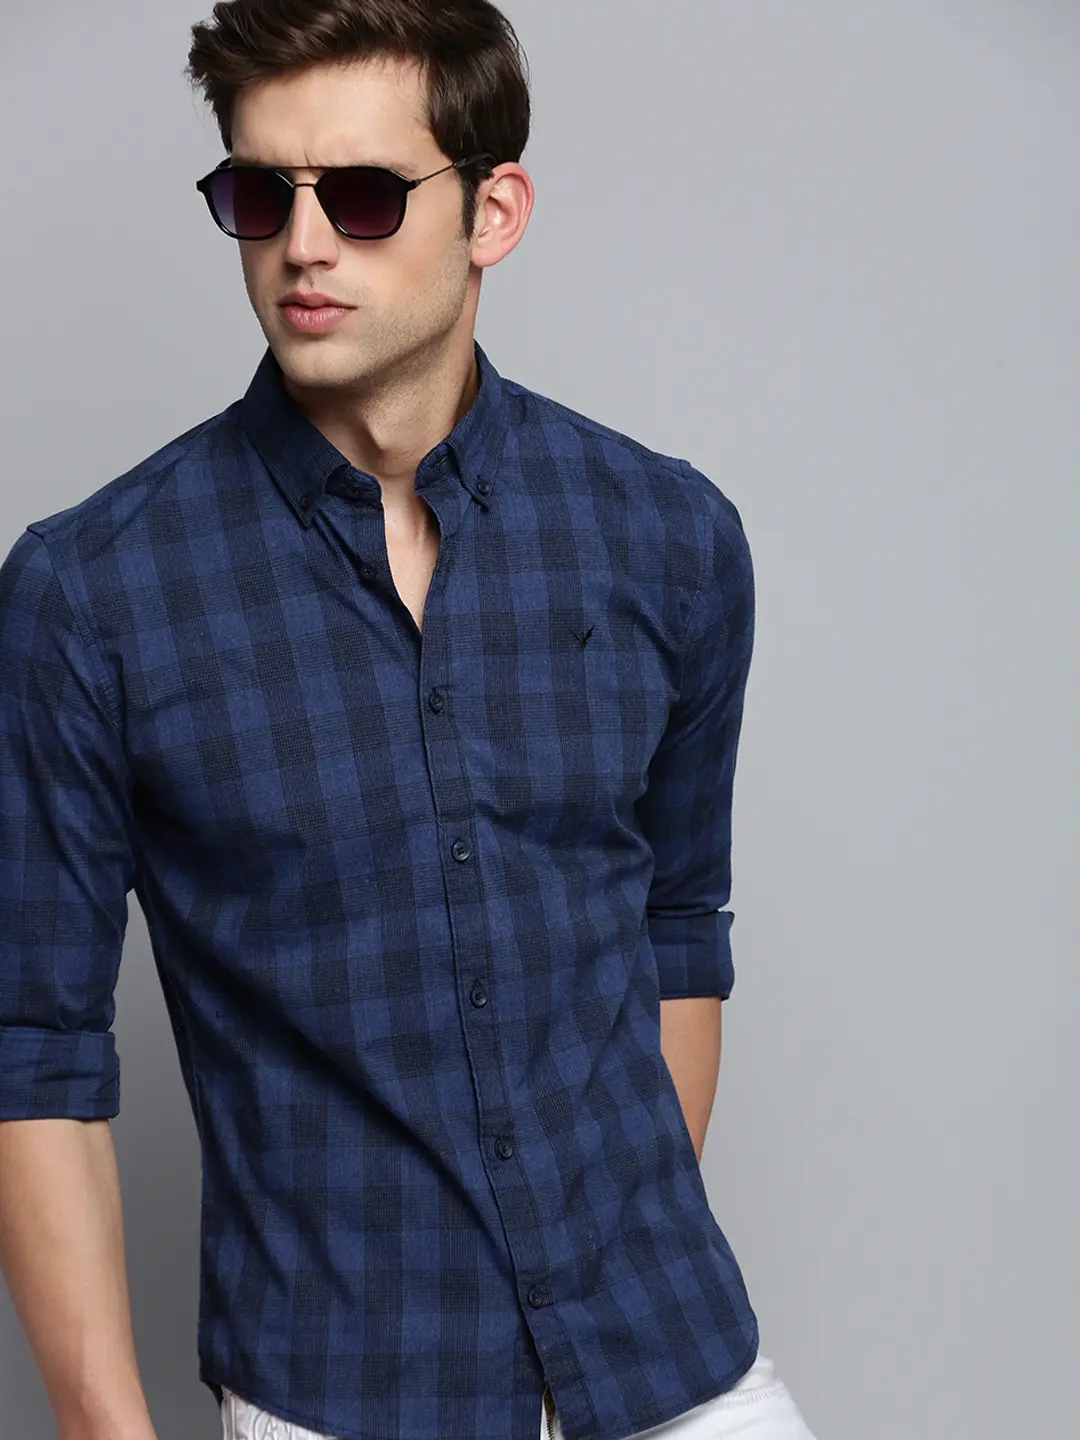 SHOWOFF Men's Spread Collar Checked Navy Blue Classic Shirt